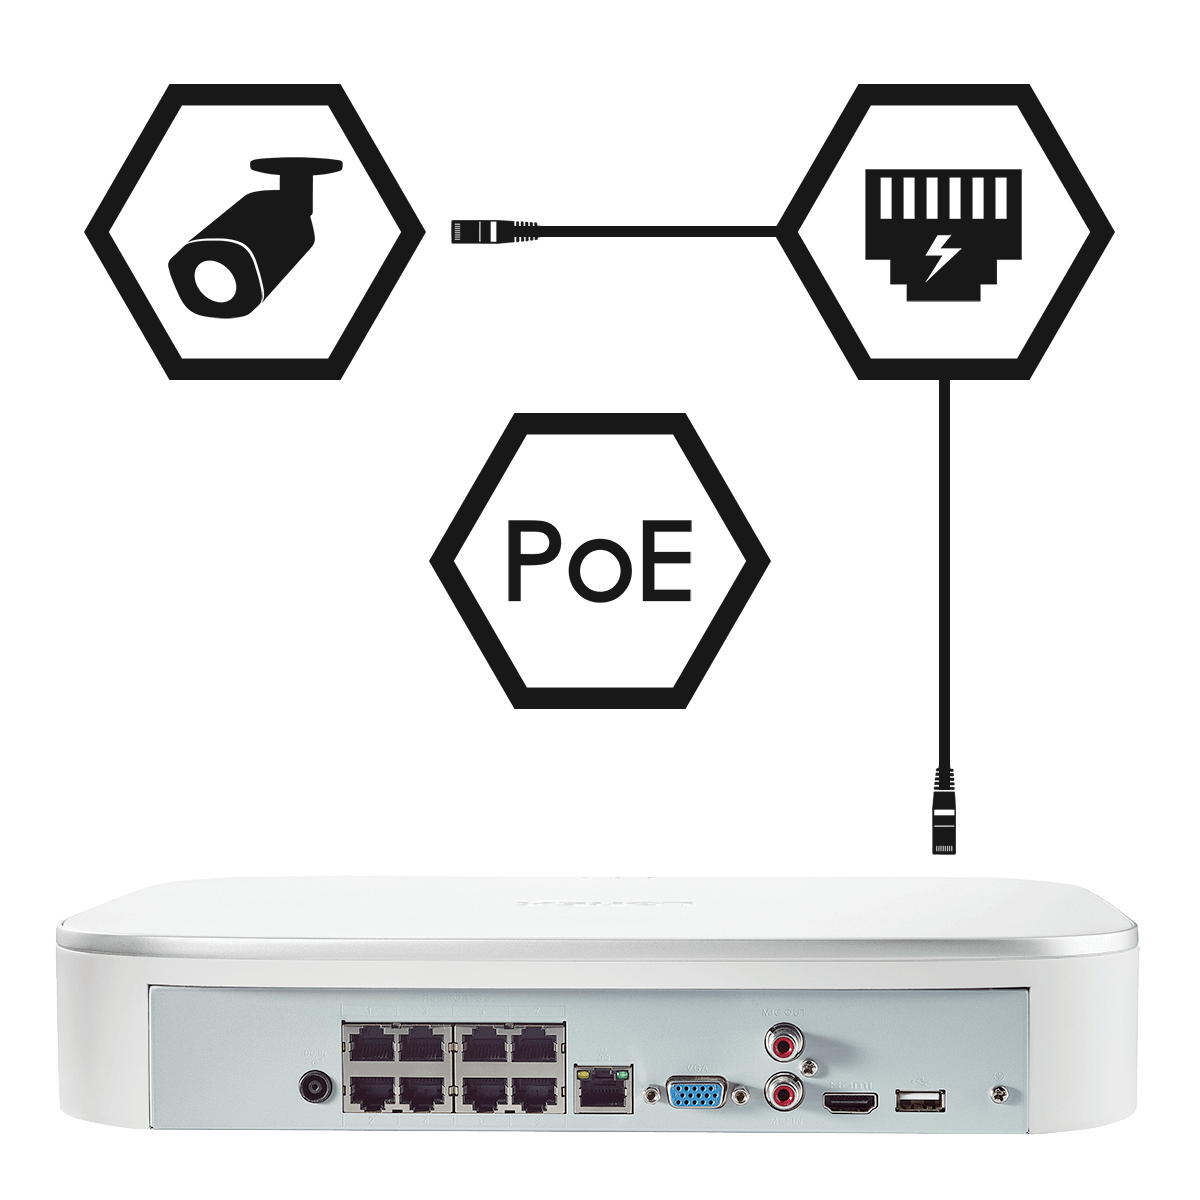 Plug-and-play simplicity with Power over Ethernet technology